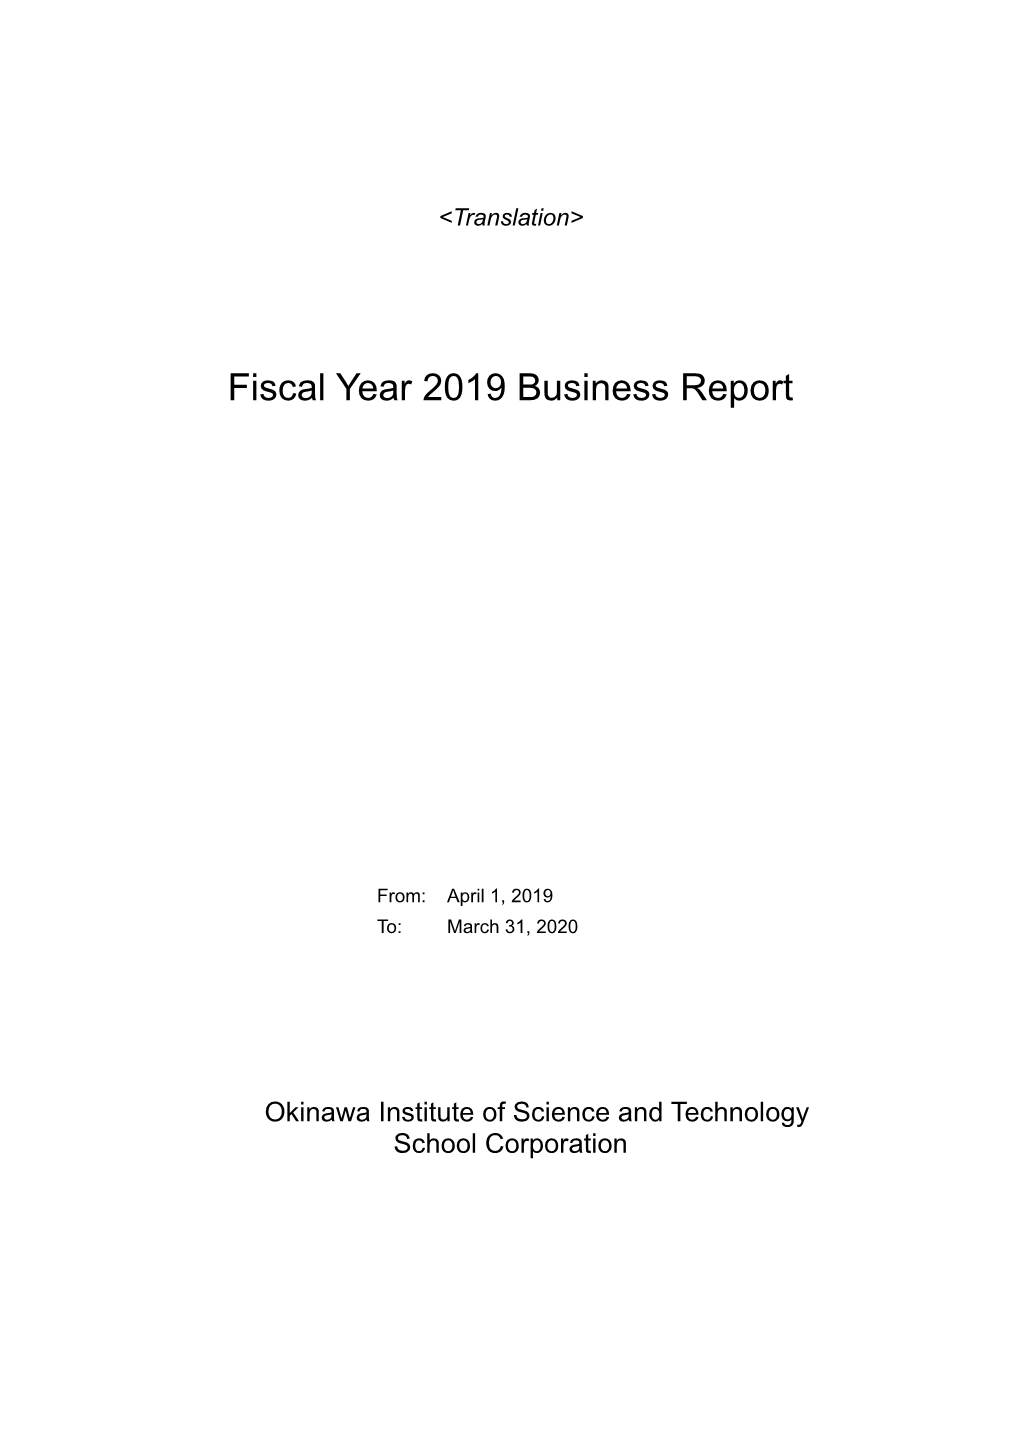 Fiscal Year 2019 Business Report